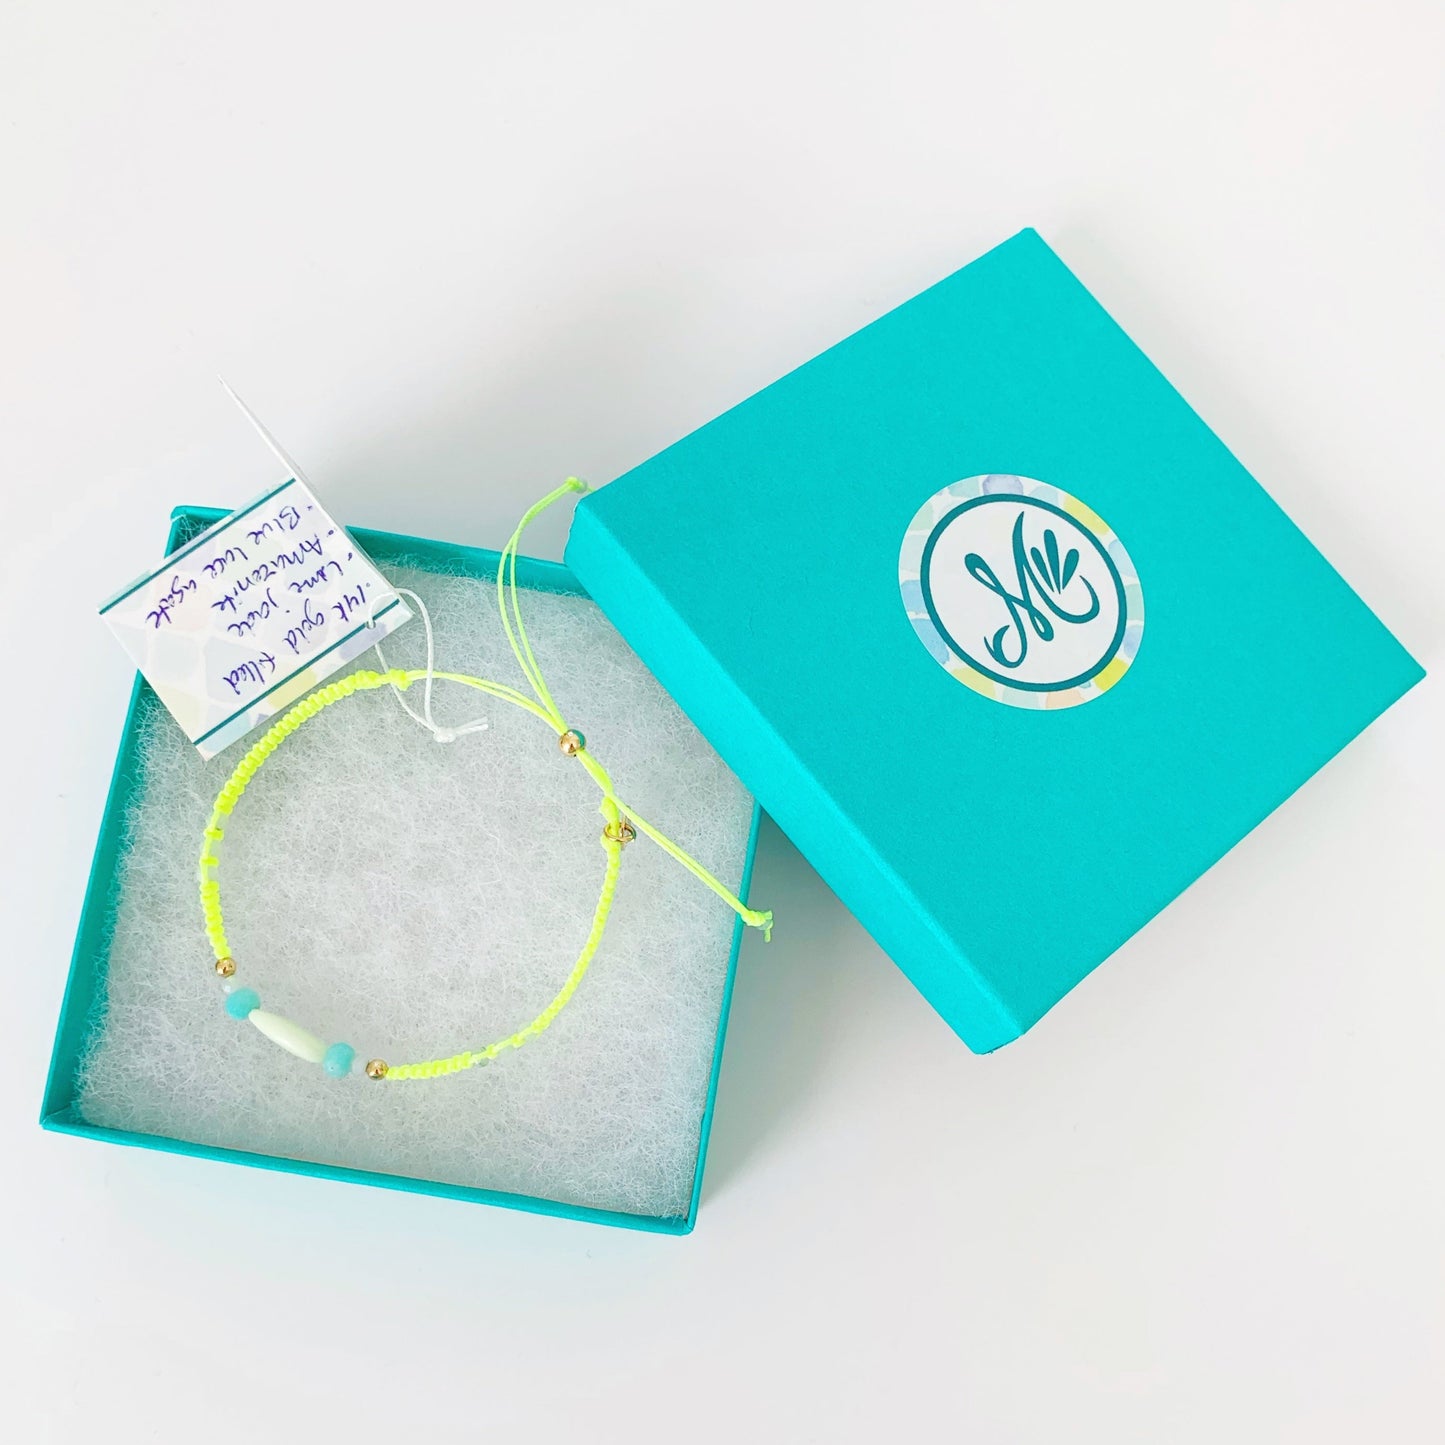 a top view of the neon yellow captiva macrame bracelet in a mermaids and madeleines teal gift box pictured on a white surfae